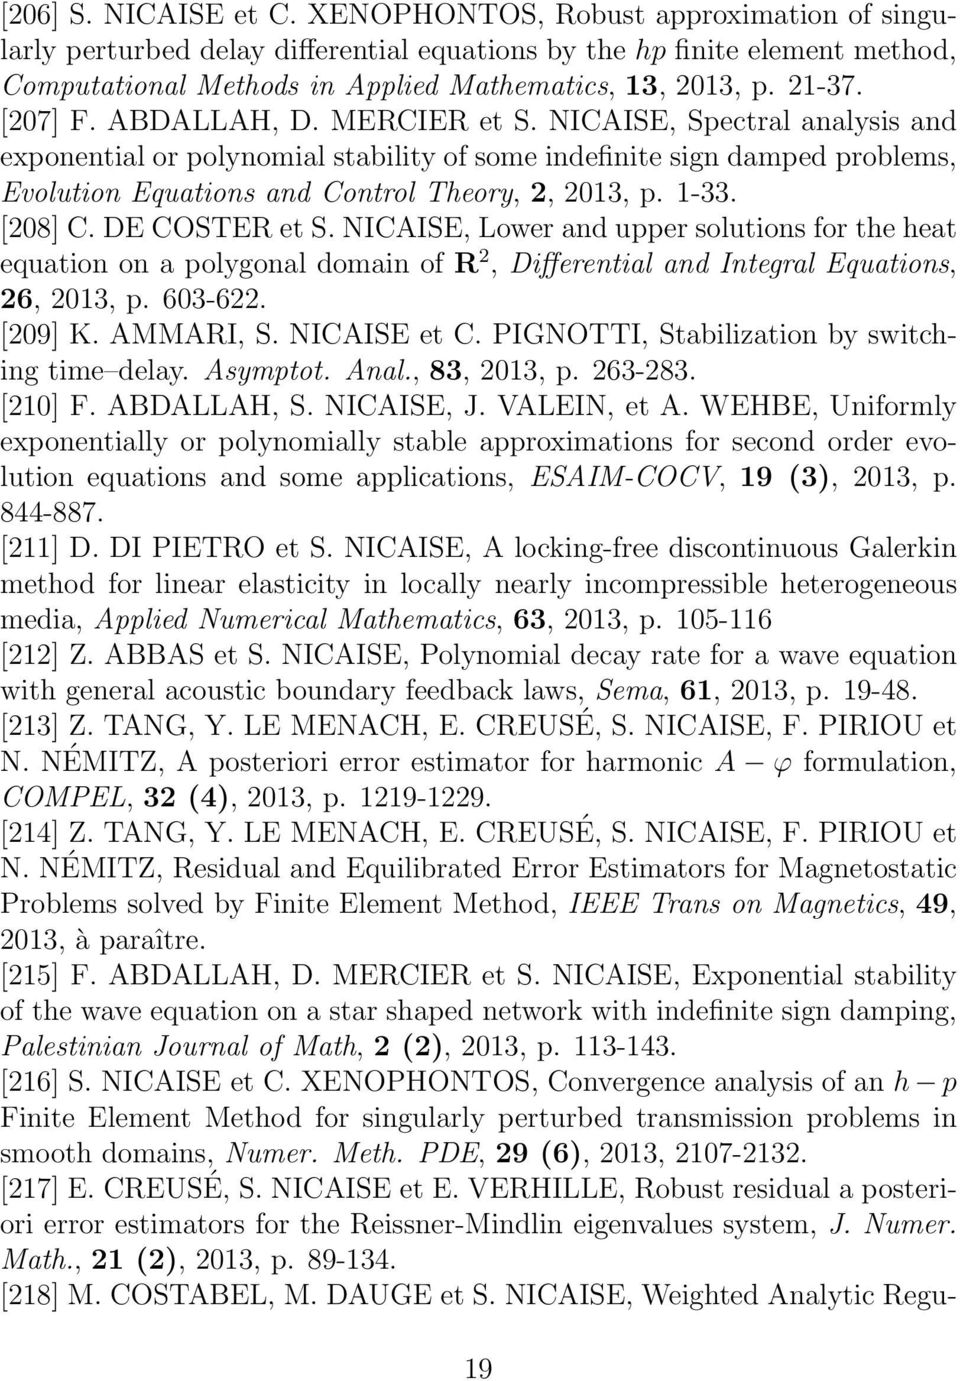 ABDALLAH, D. MERCIER et S. NICAISE, Spectral analysis and exponential or polynomial stability of some indefinite sign damped problems, Evolution Equations and Control Theory, 2, 2013, p. 1-33.